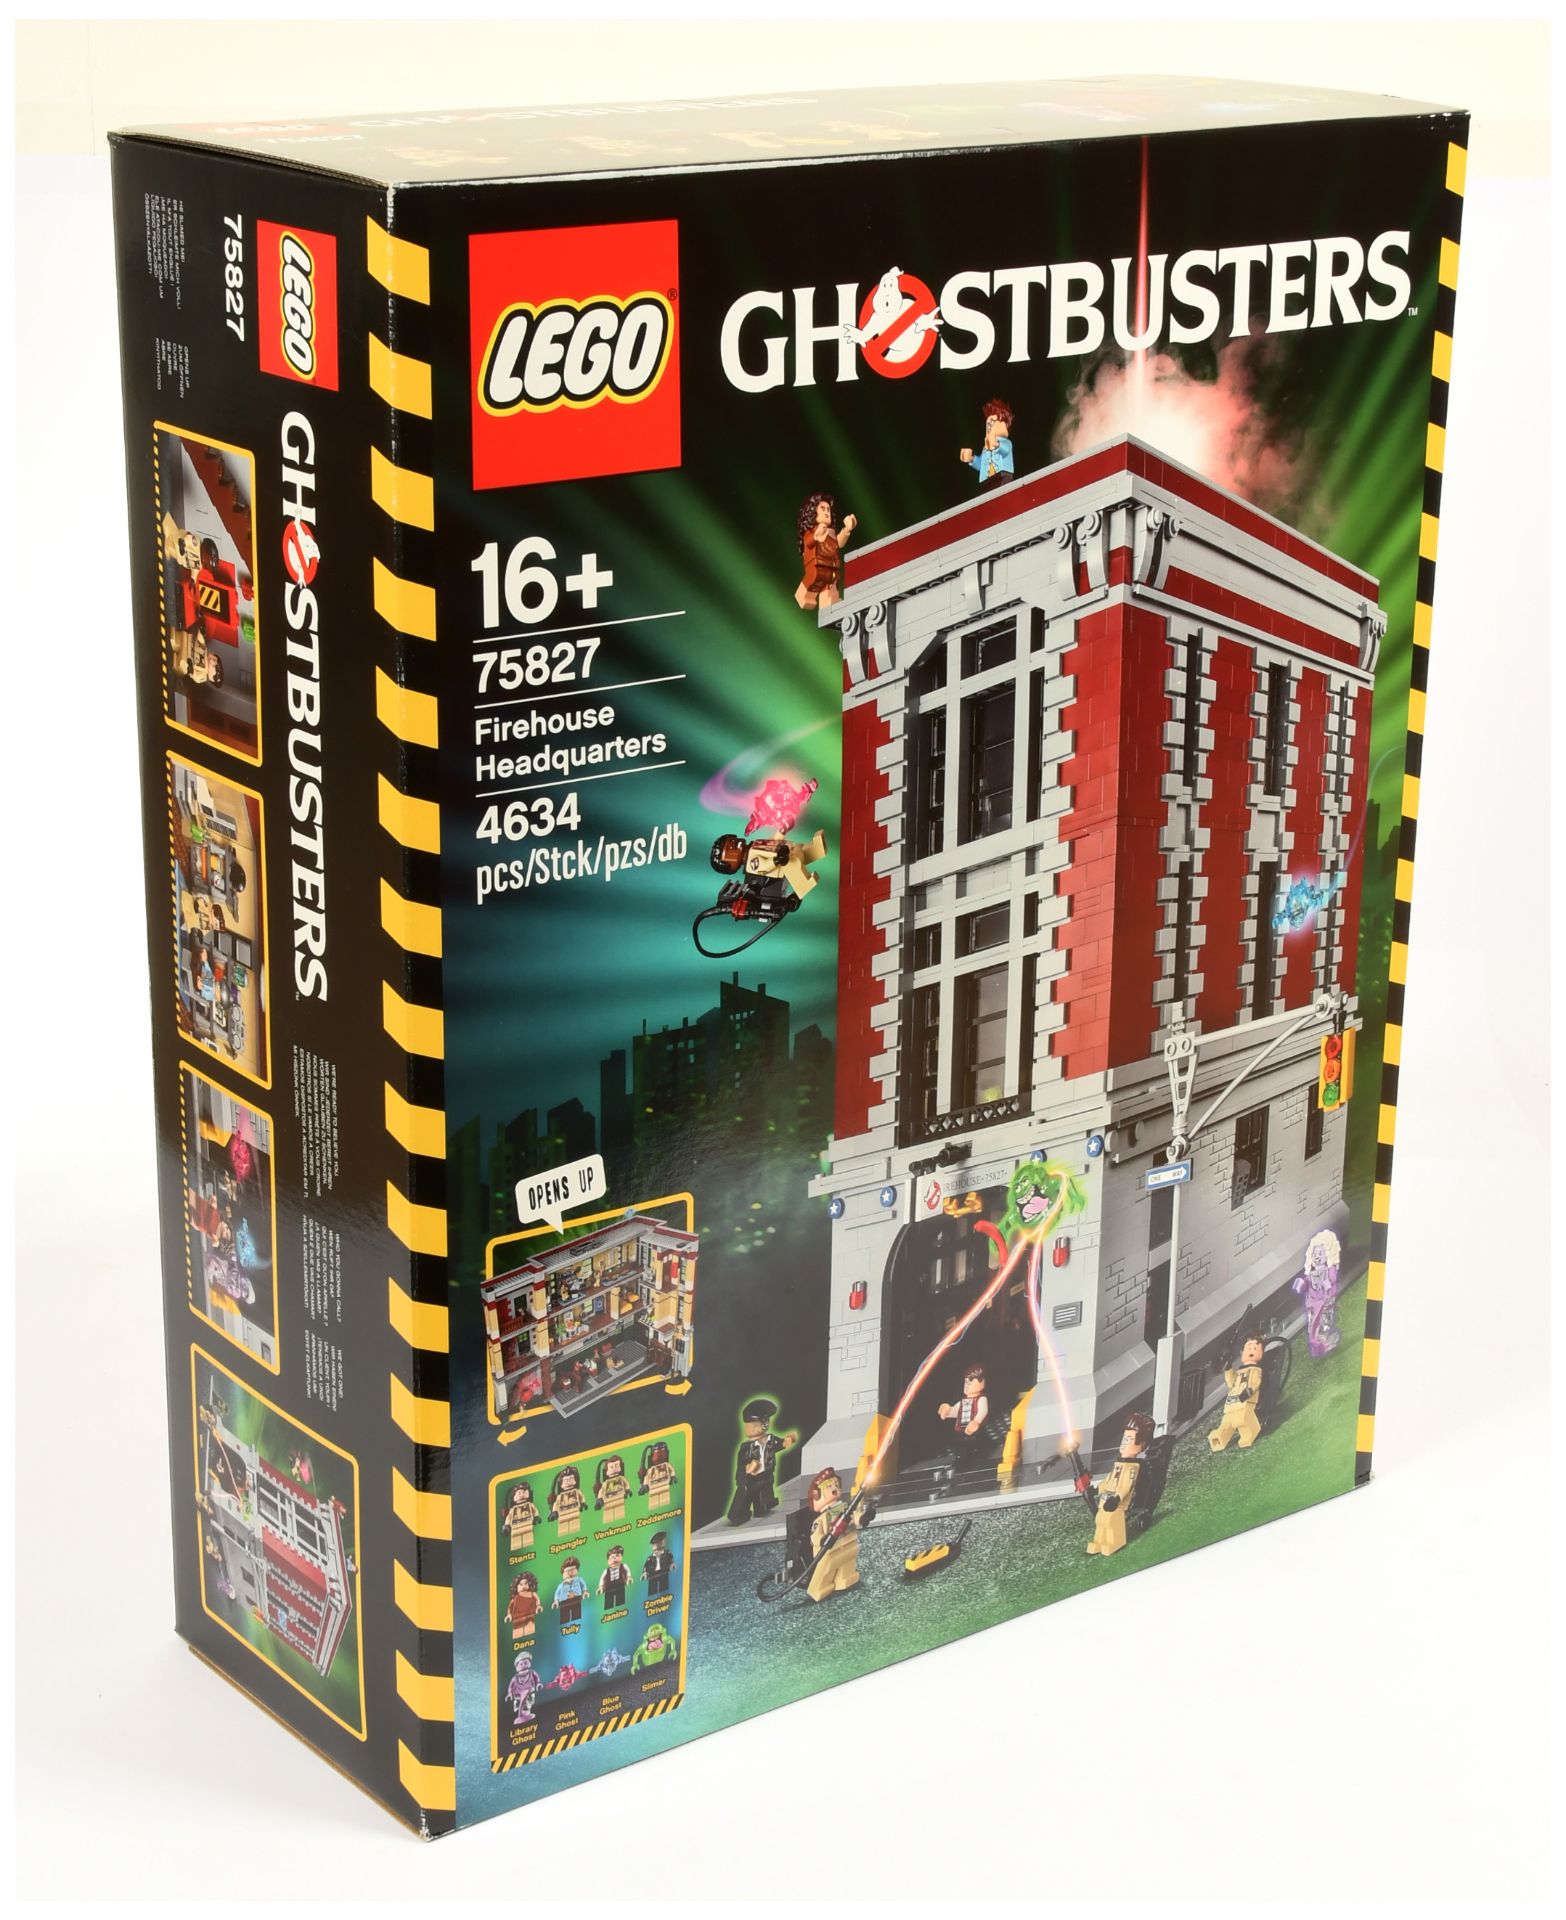 Lego 75827 Ghostbusters Firehouse Headquarters - within Near Mint Sealed packaging